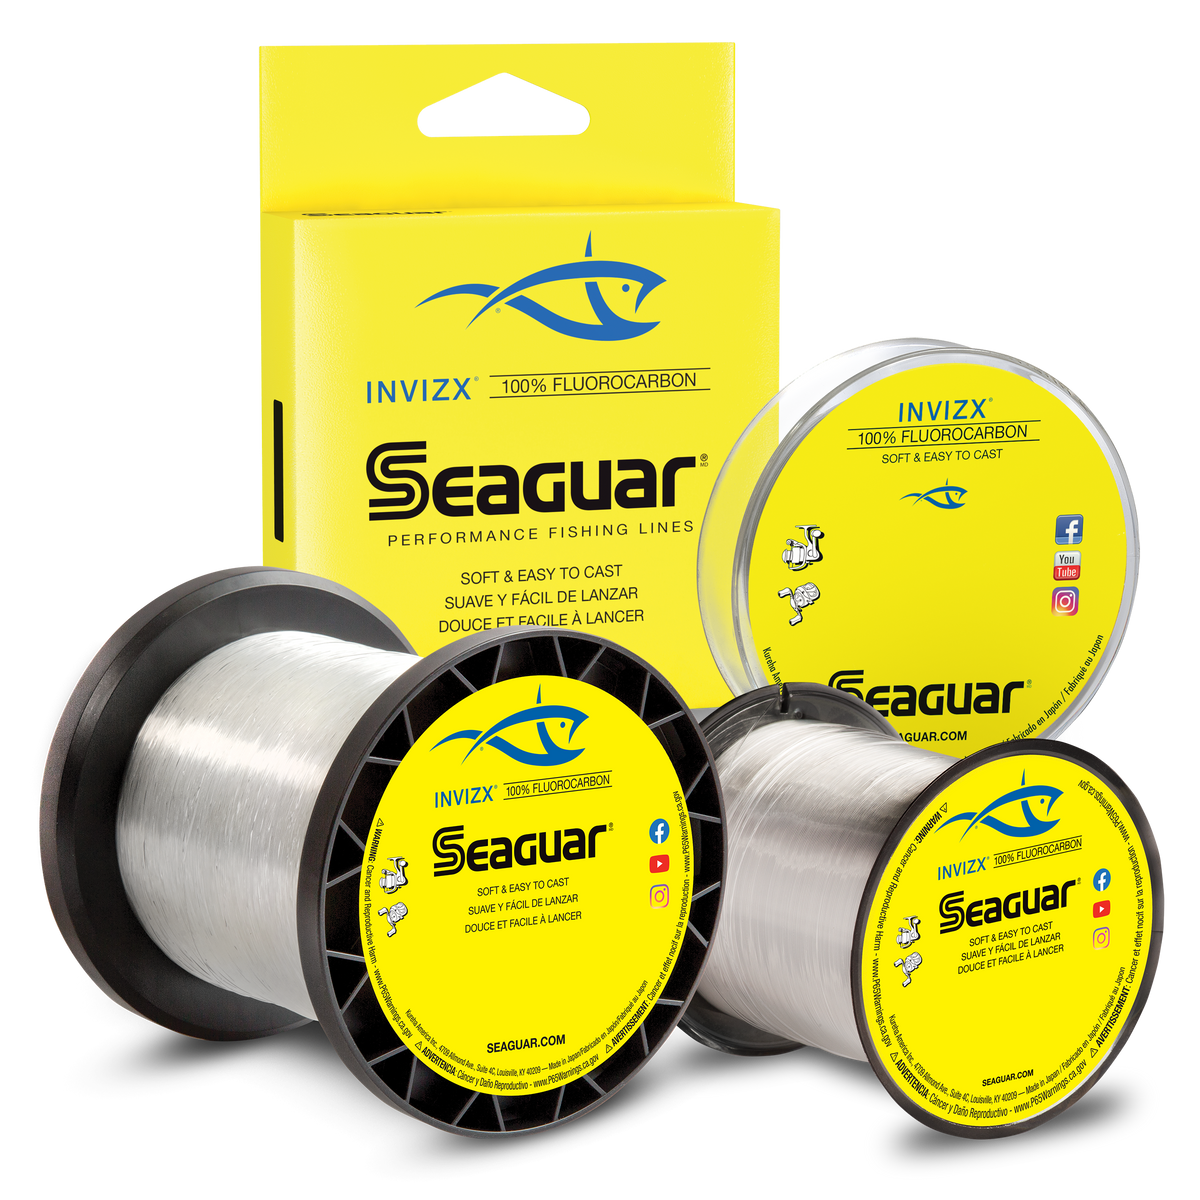 Seaguar Red Label 100% Fluorocarbon Fishing Line 6lbs, 200yds